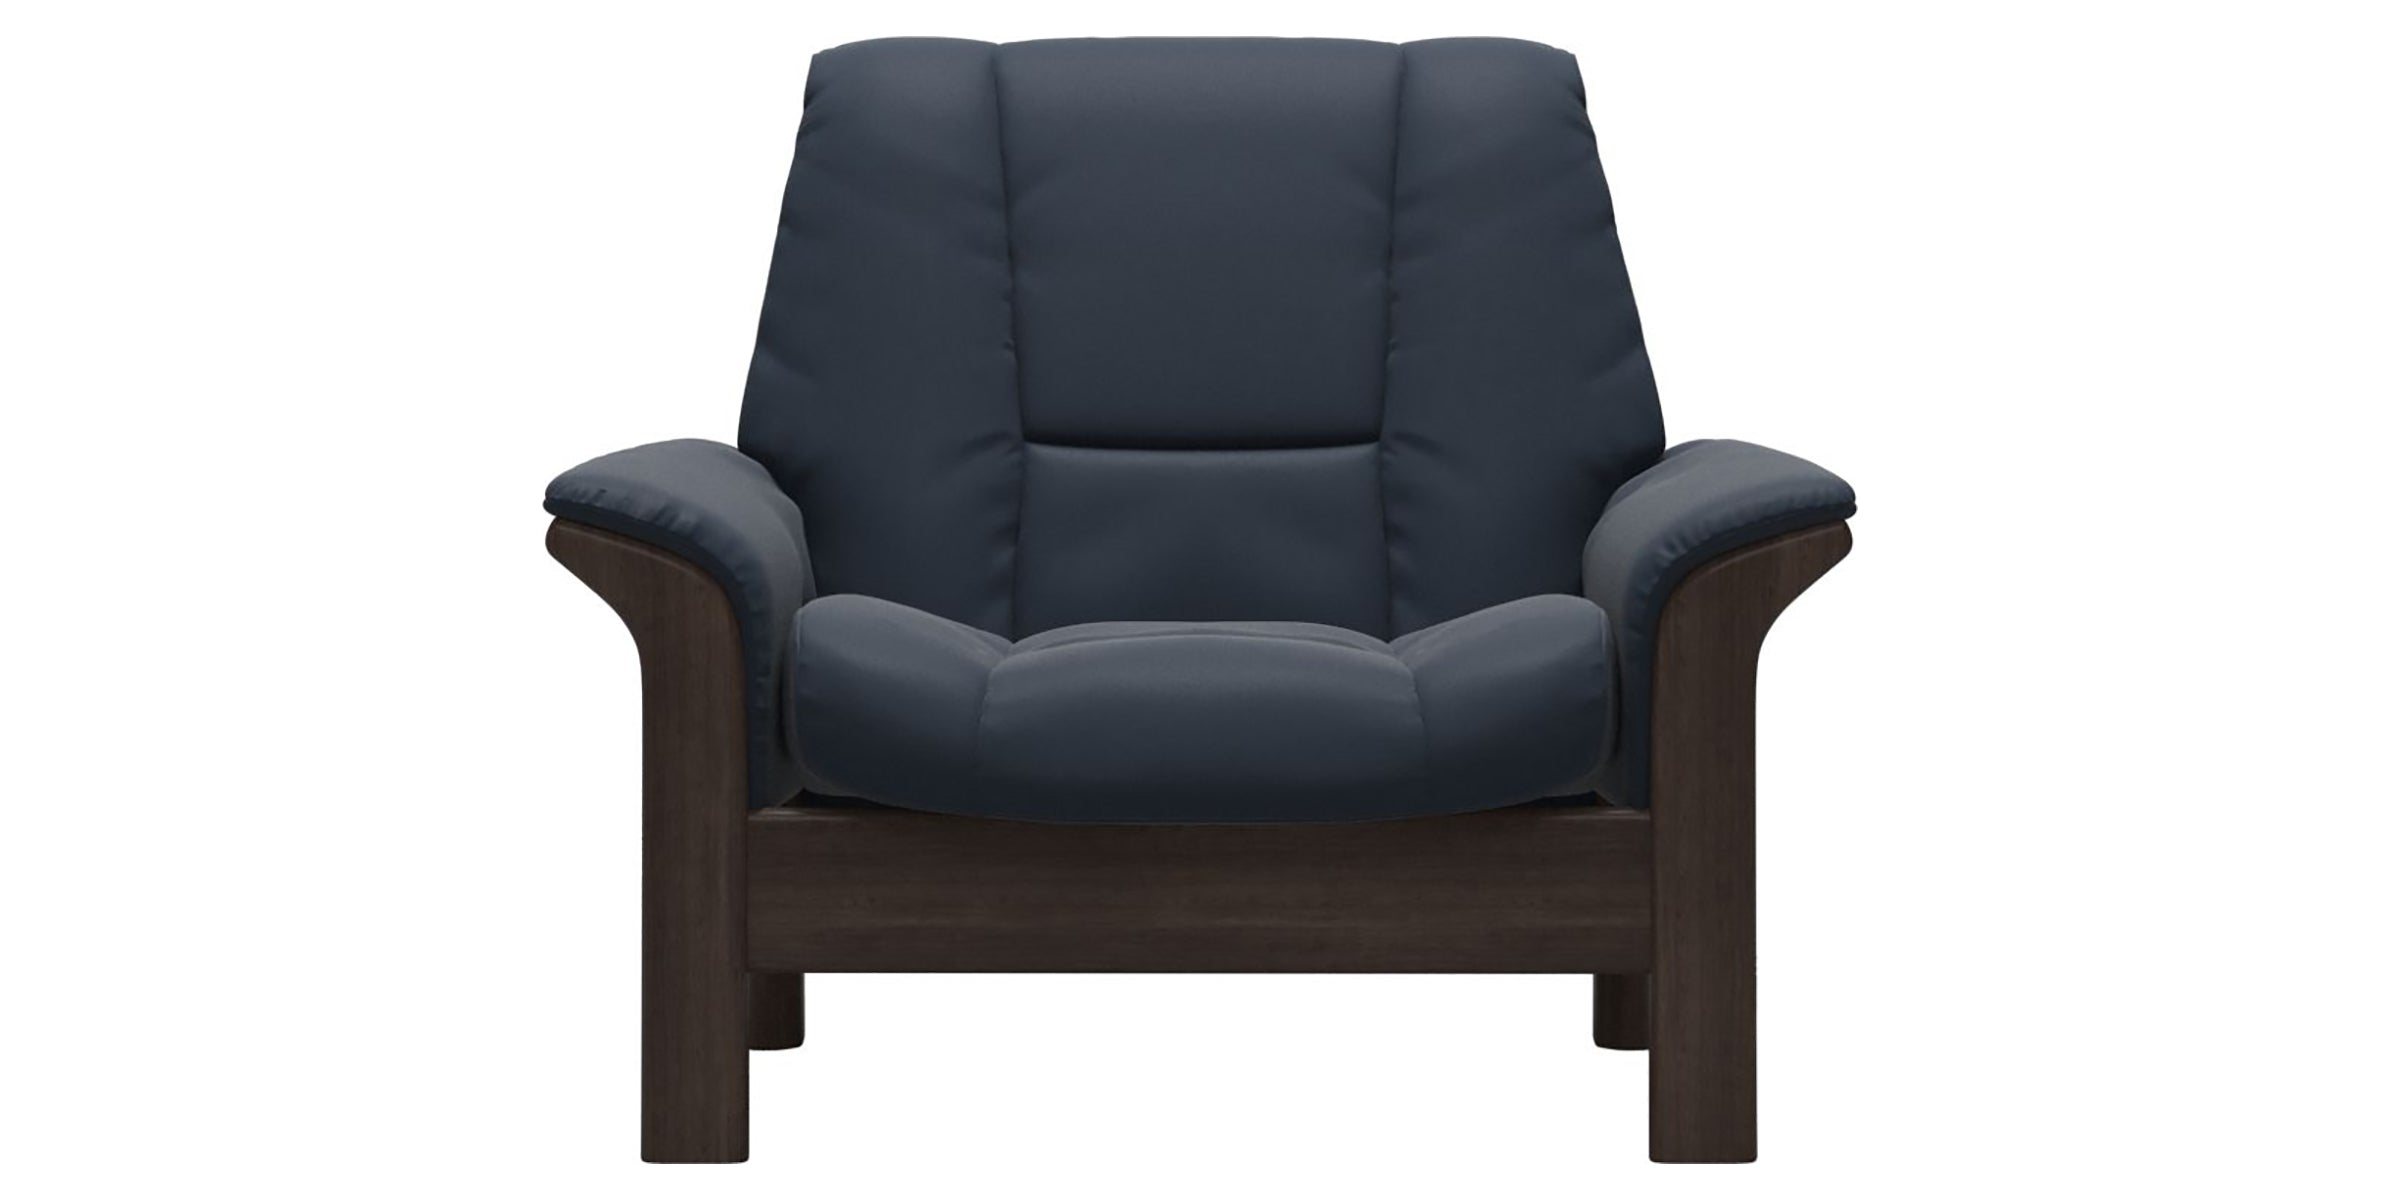 Paloma Leather Oxford Blue and Wenge Base | Stressless Buckingham Low Back Chair | Valley Ridge Furniture